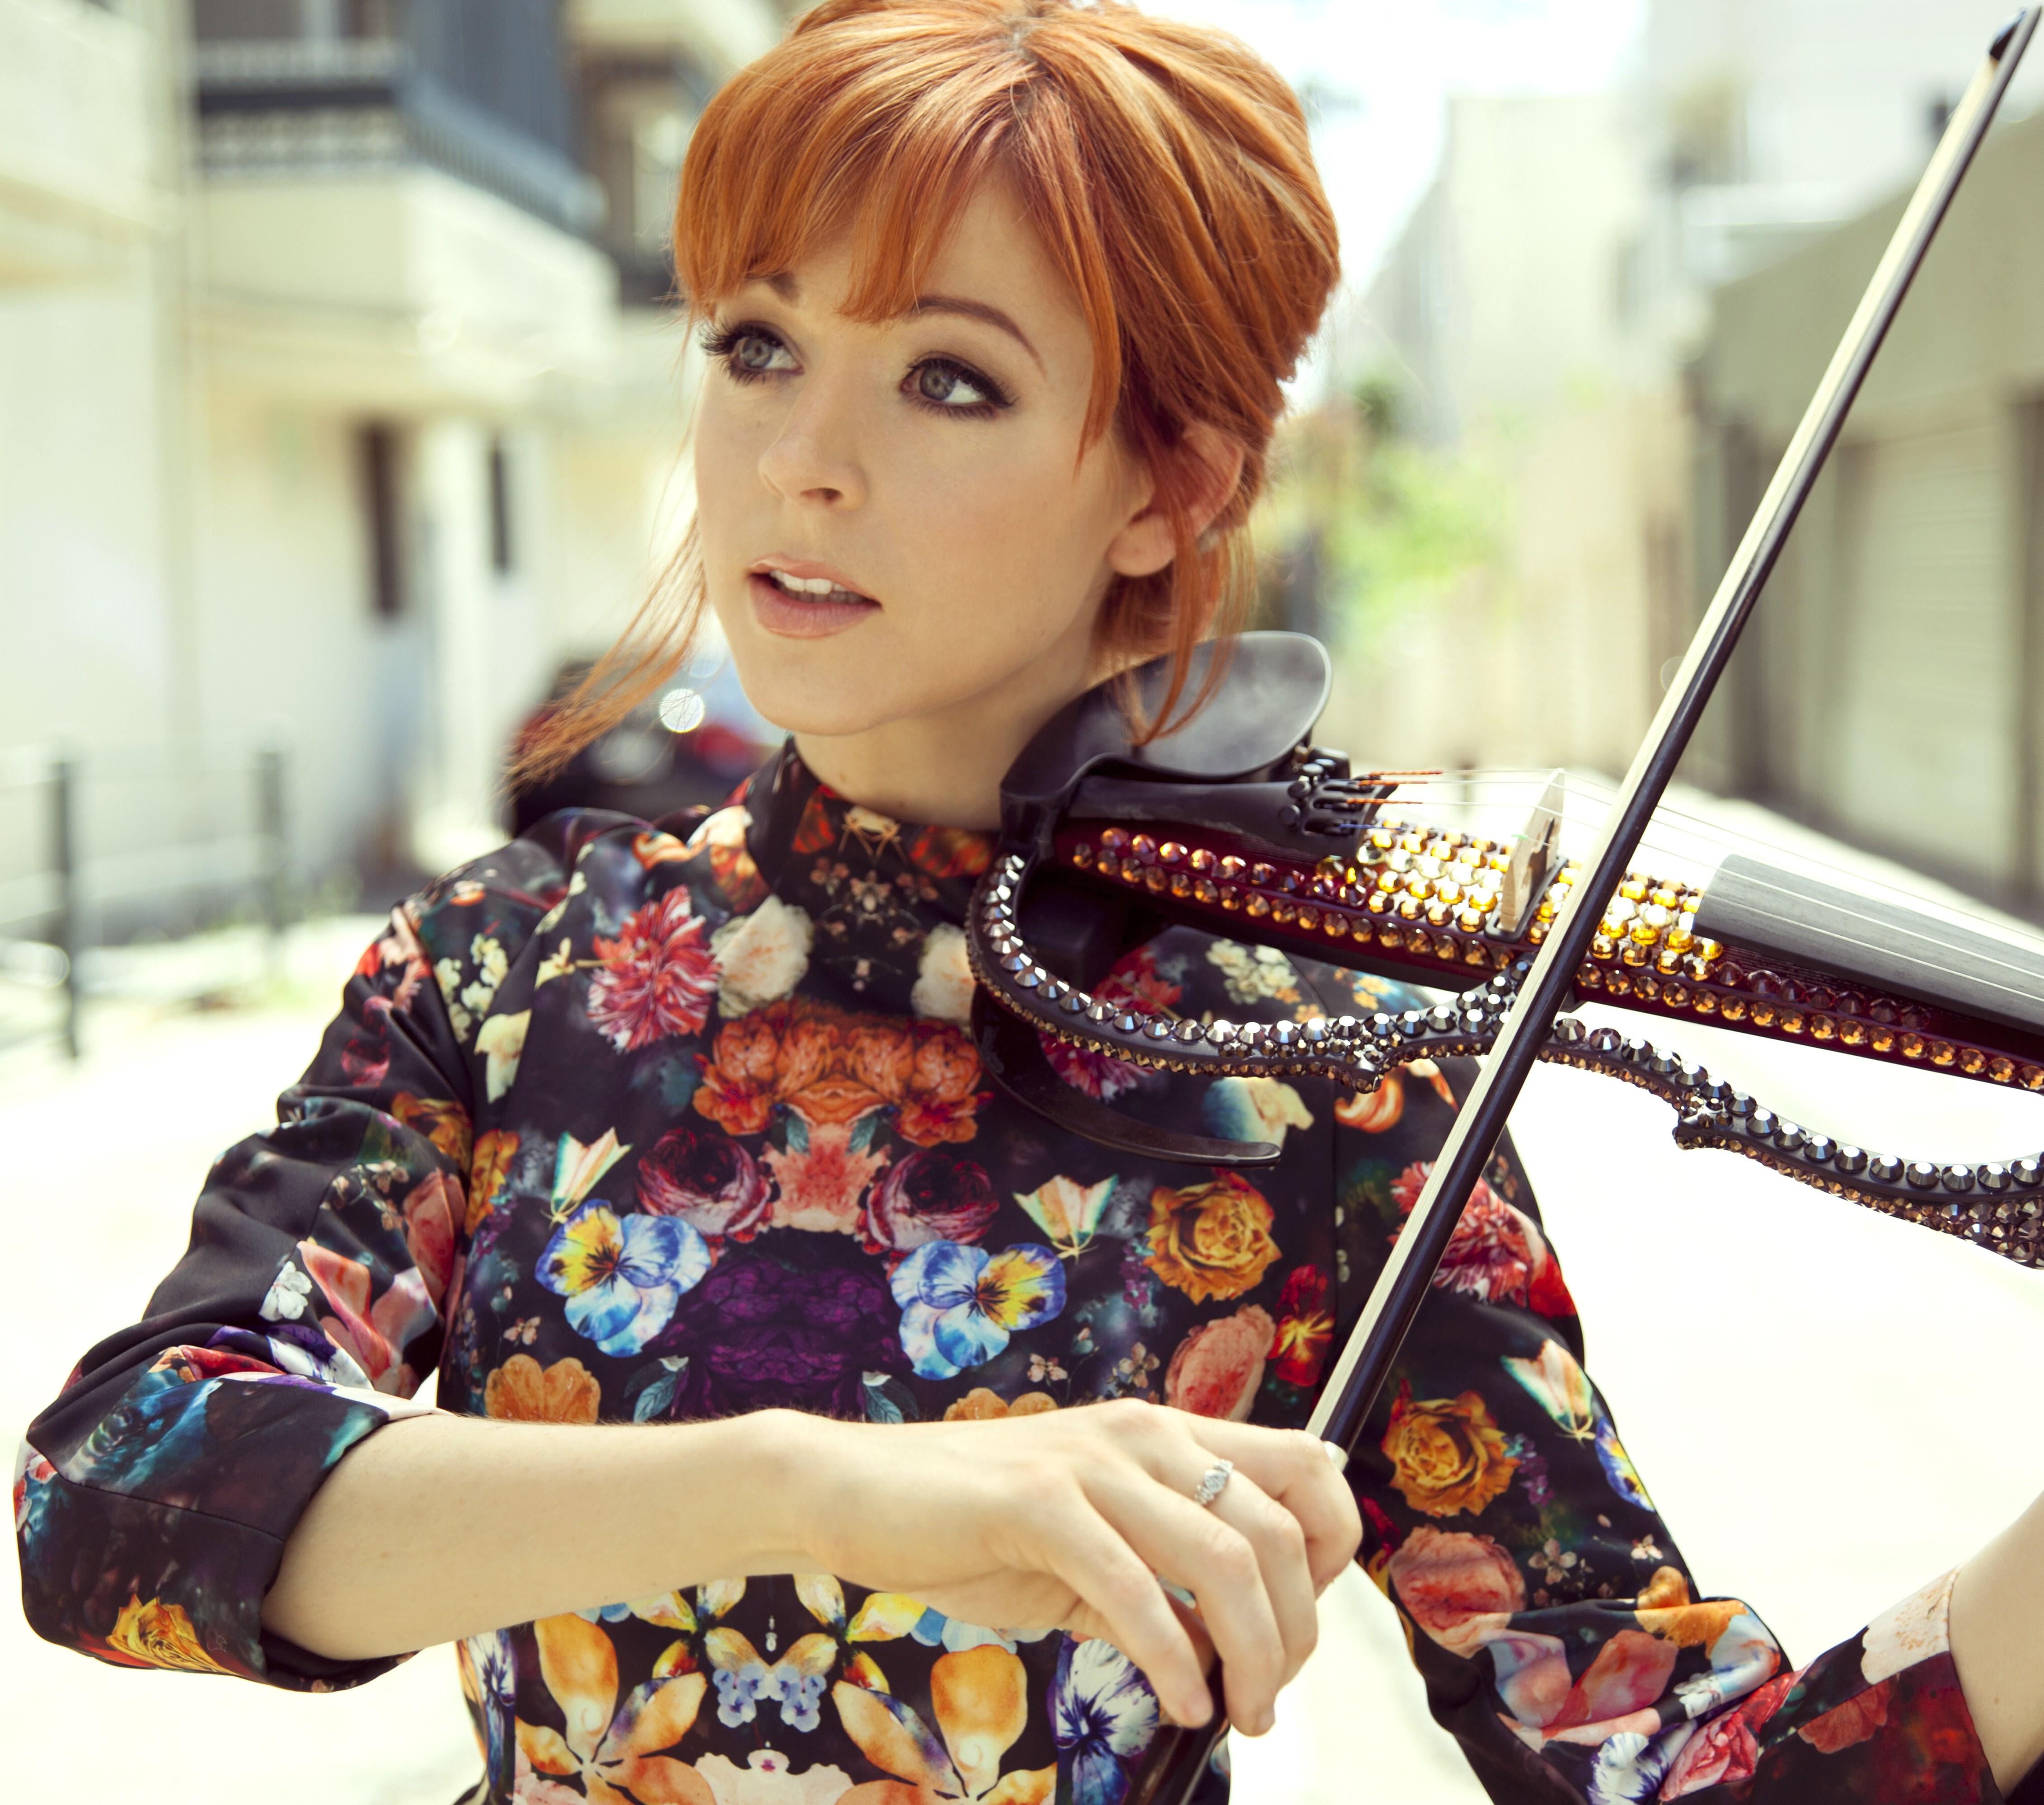 Lindsey Stirling Backgrounds, Compatible - PC, Mobile, Gadgets| 4524x3994 px